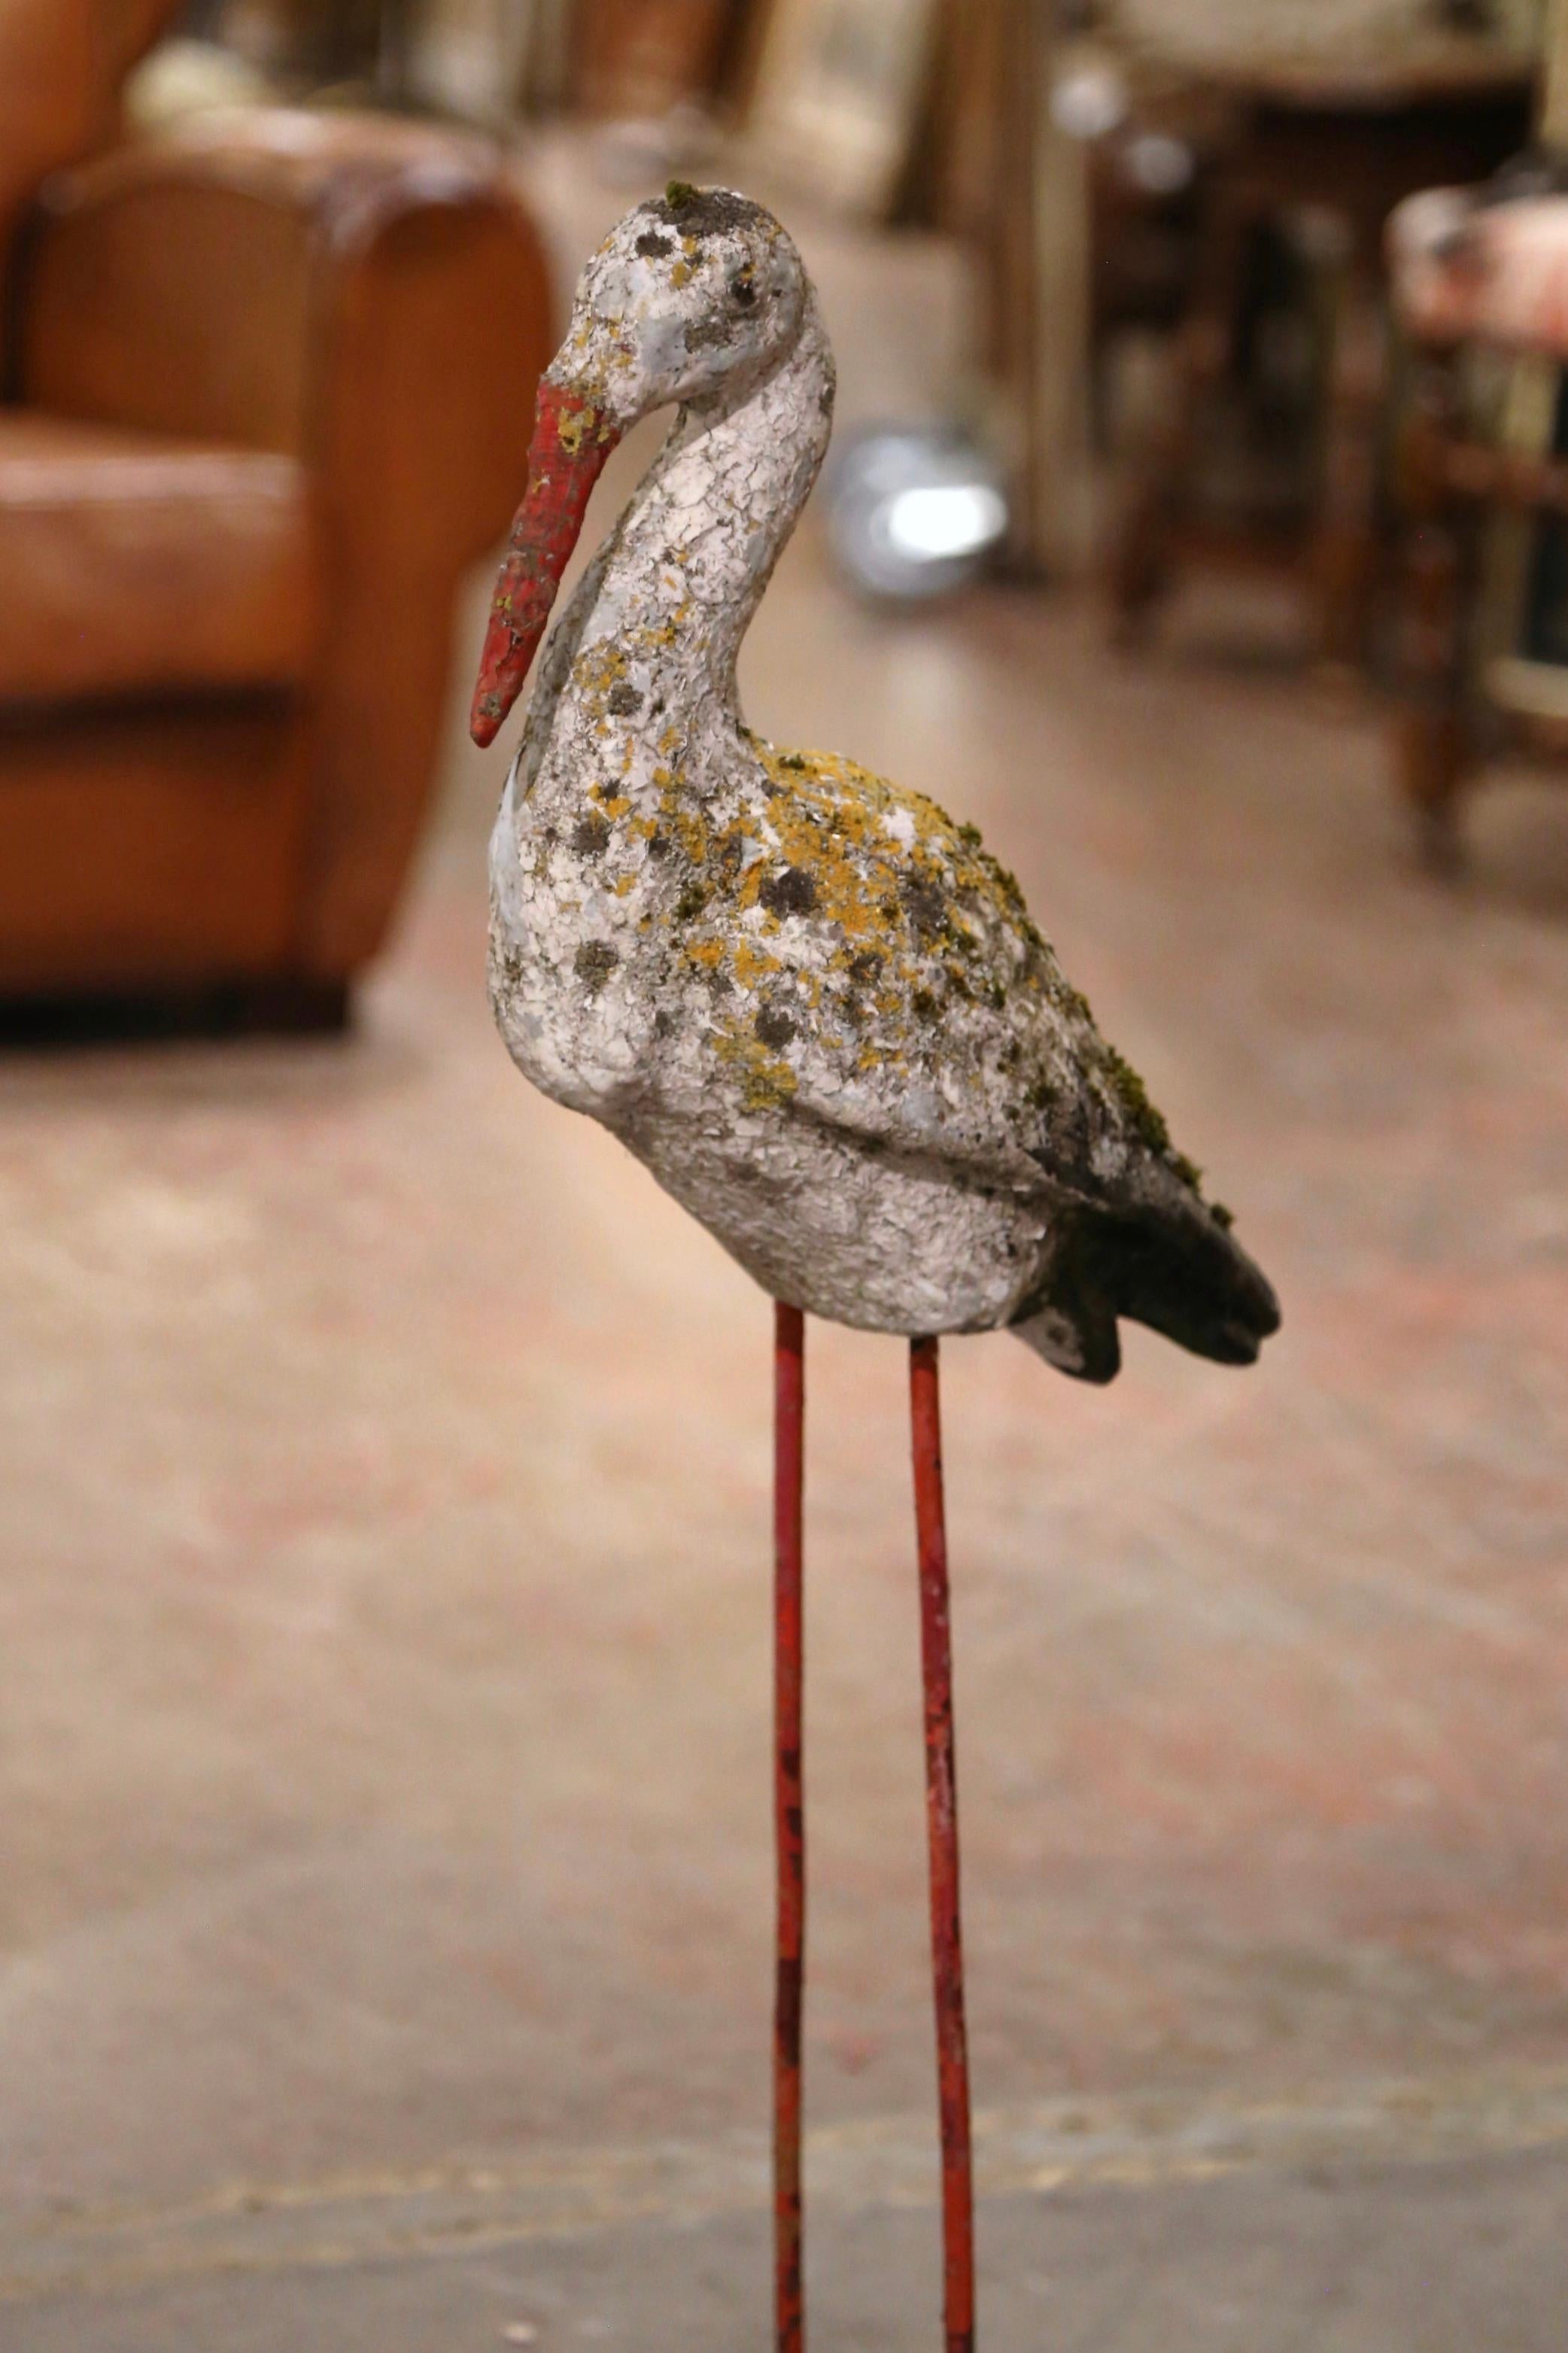 Decorate a garden or courtyard with this antique crane statue! Crafted in Normandy France circa 1870, and built of concrete, the bird sculpture stands on straight legs with feet planted firmly in grass with its head forward. The body of the crane is